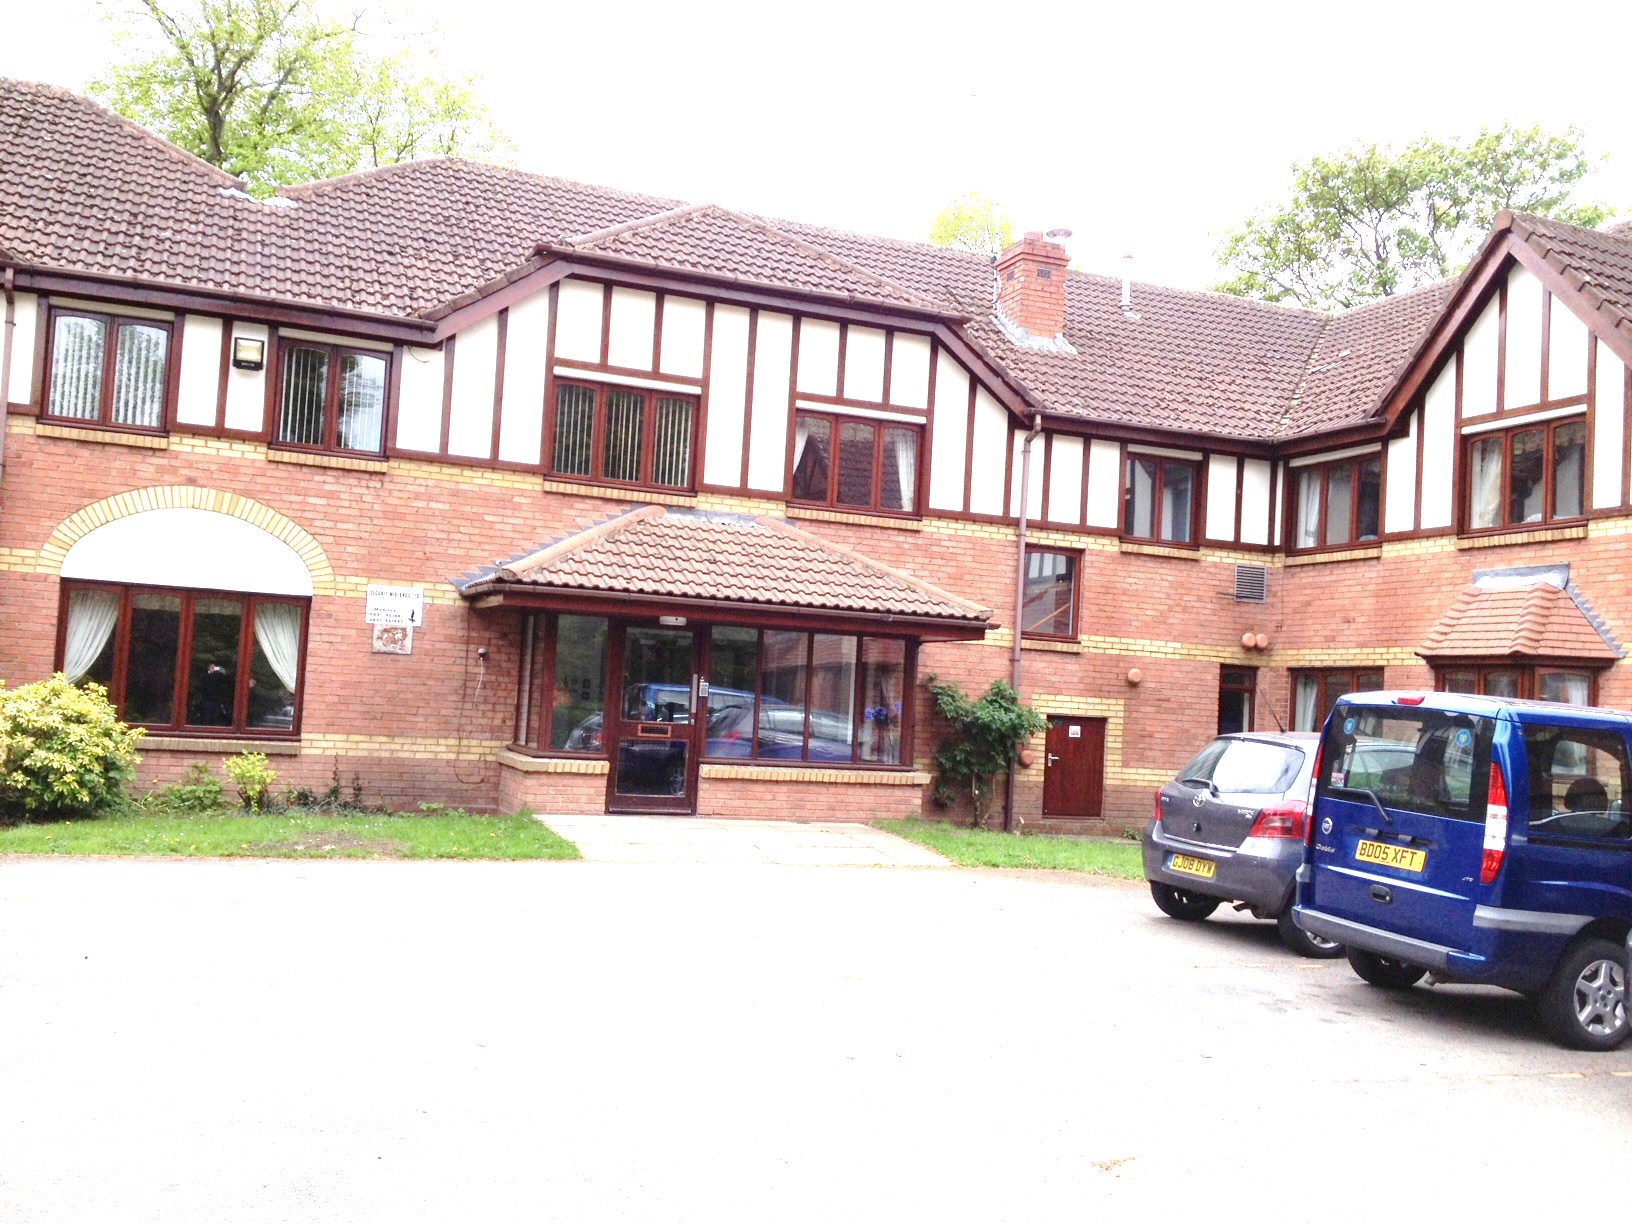 Himley Manor - Care Home